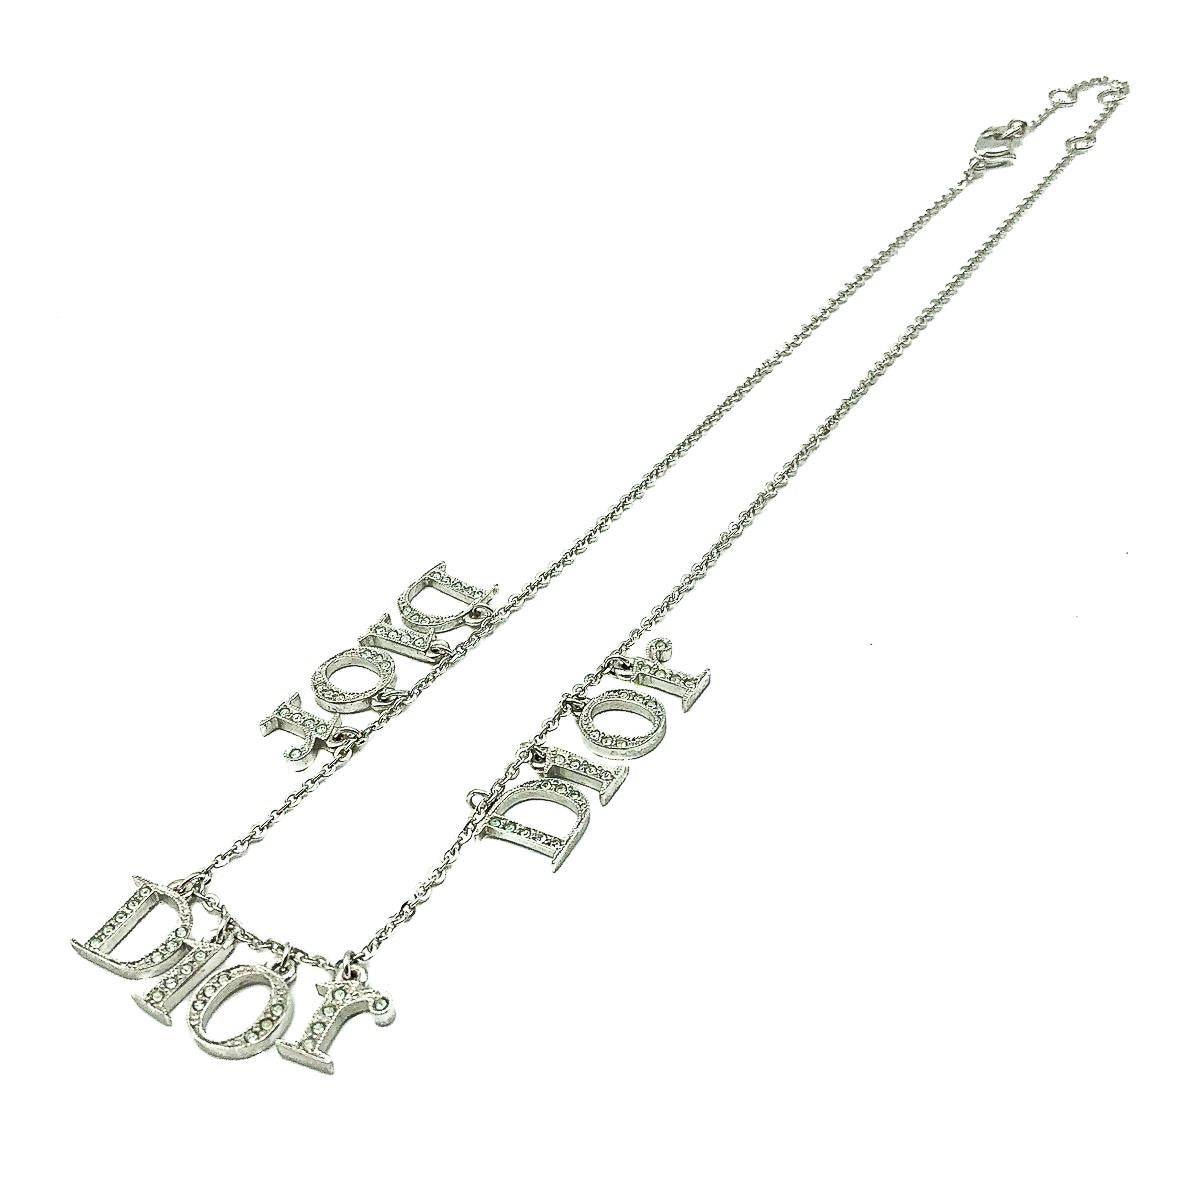 A Vintage Dior Spell Out Necklace. Featuring the most fabulous array of crystal set charms spelling out Dior, not once, but three times. Created in rhodium plated metal. Signed, in very good vintage condition, approx. adjustable 38cm - 44cm. A